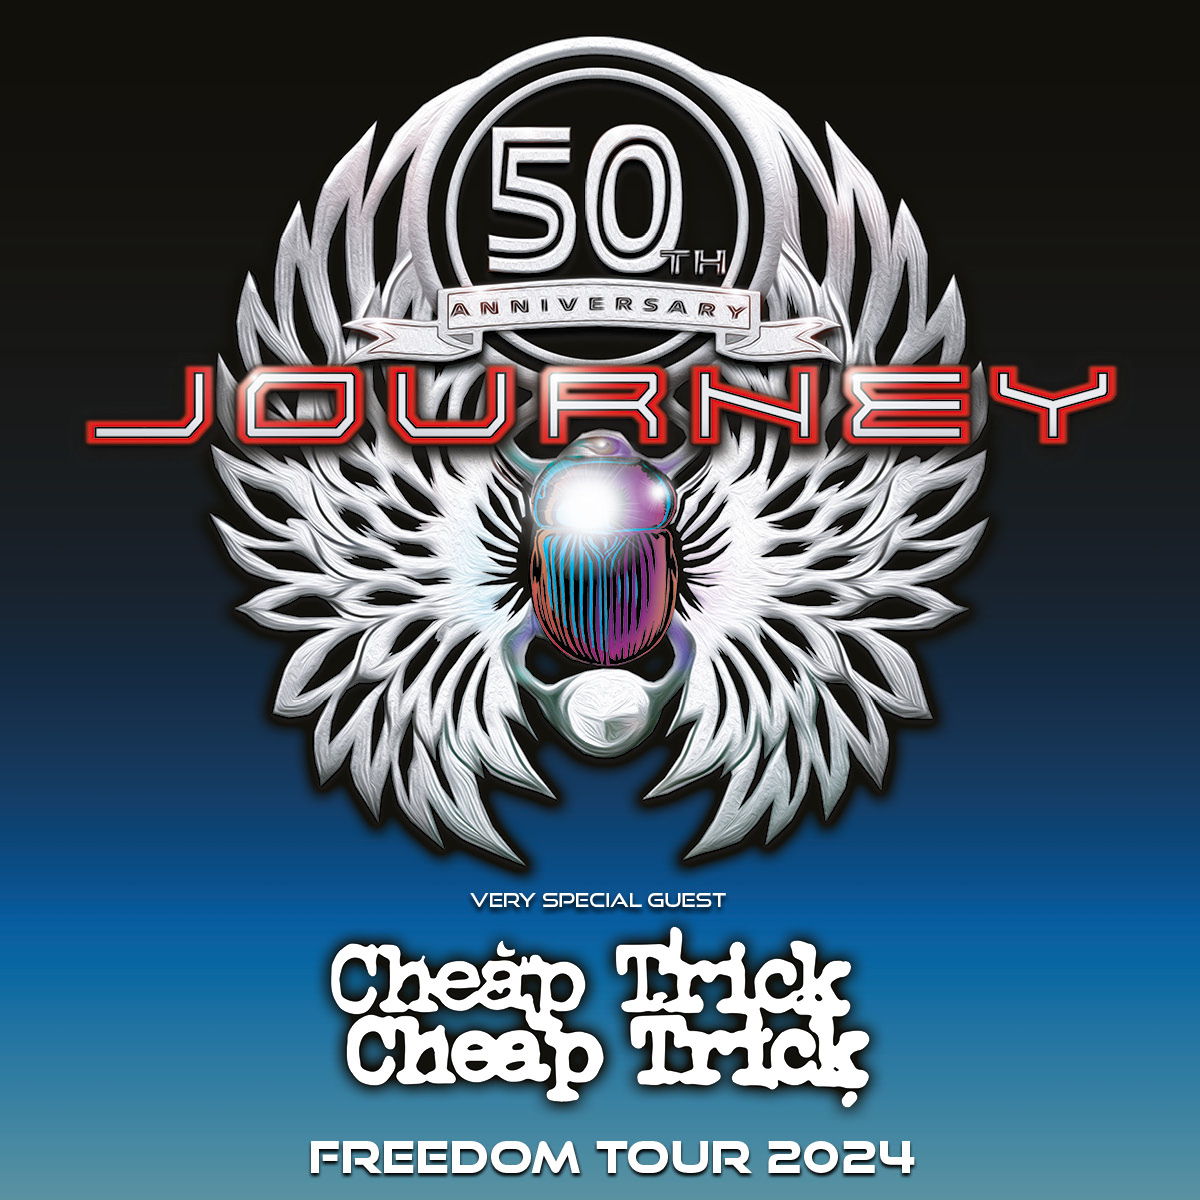 🆕  Rock legends @JourneyOfficial bring the #FreedomTour2024 to #Leeds @fdarena, celebrating their 50th anniversary alongside special guests @cheaptrick.

🎟️ Tickets will be available from 10AM Friday 1 March.
ℹ️ bit.ly/Journey-FDAX